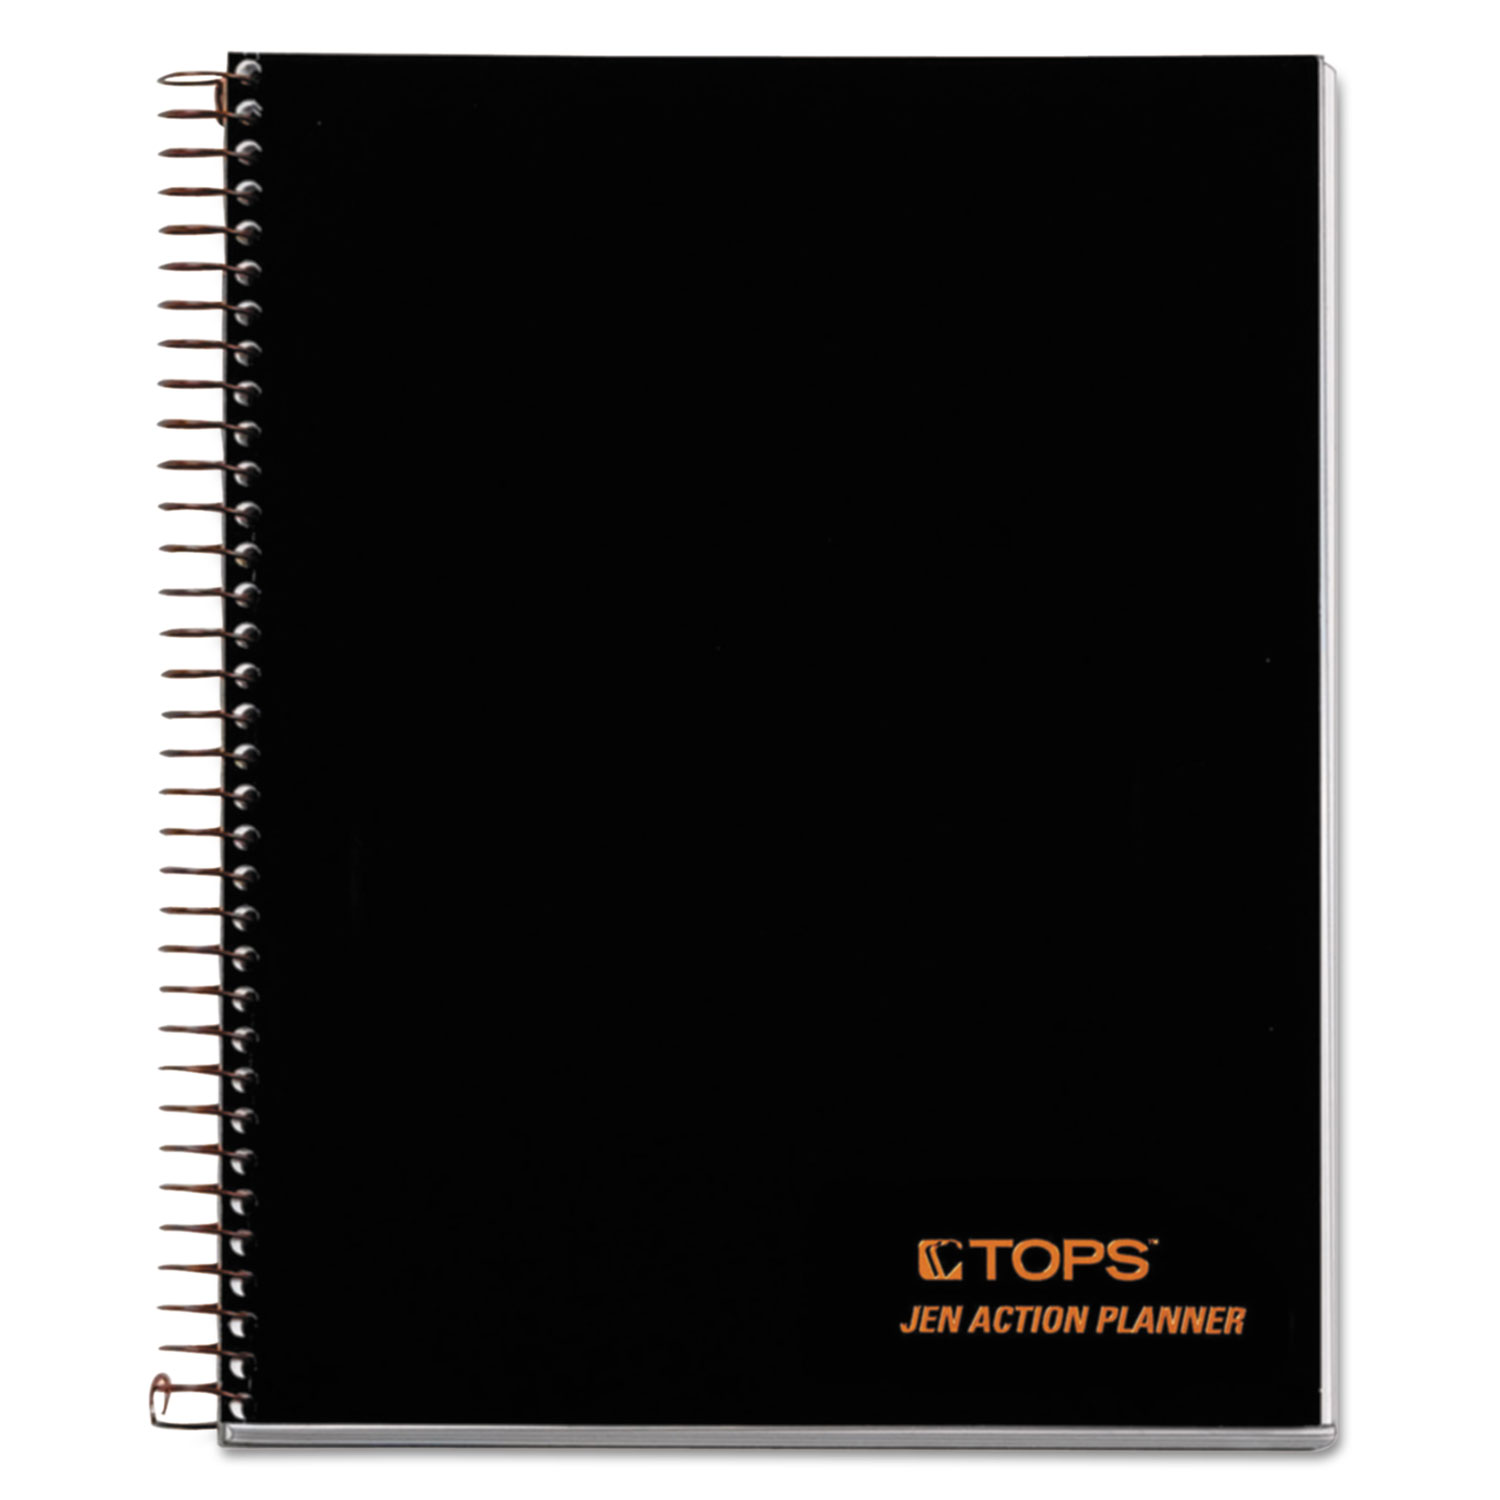  TOPS 63828 JEN Action Planner, Narrow Rule, Black Cover, 8.5 x 6.75, 100 Sheets (TOP63828) 